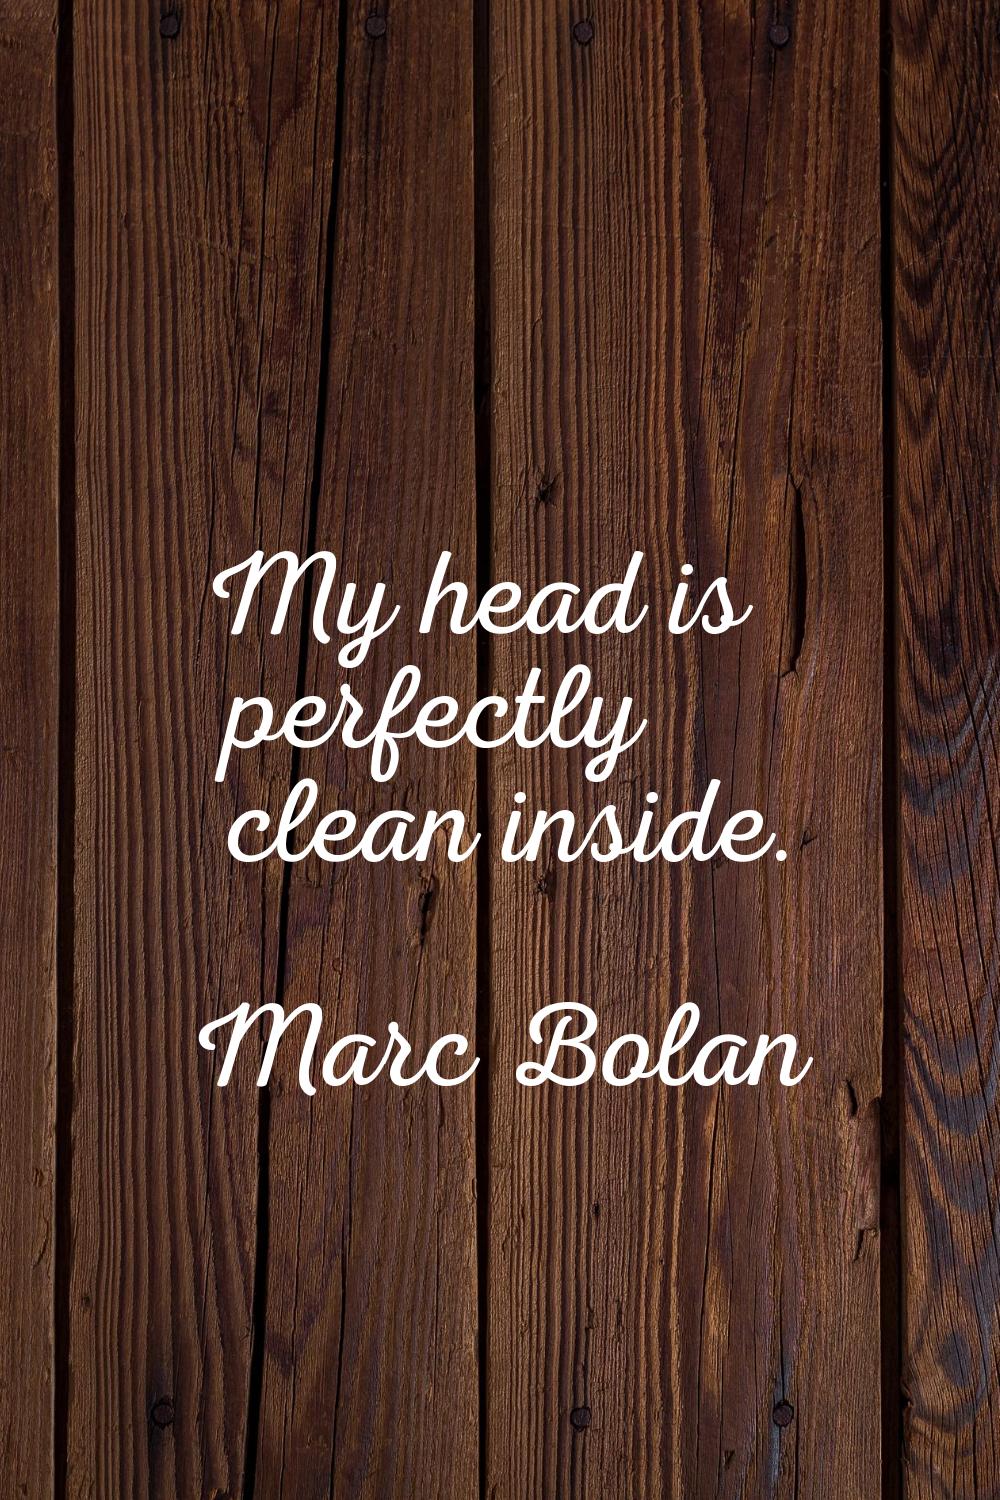 My head is perfectly clean inside.